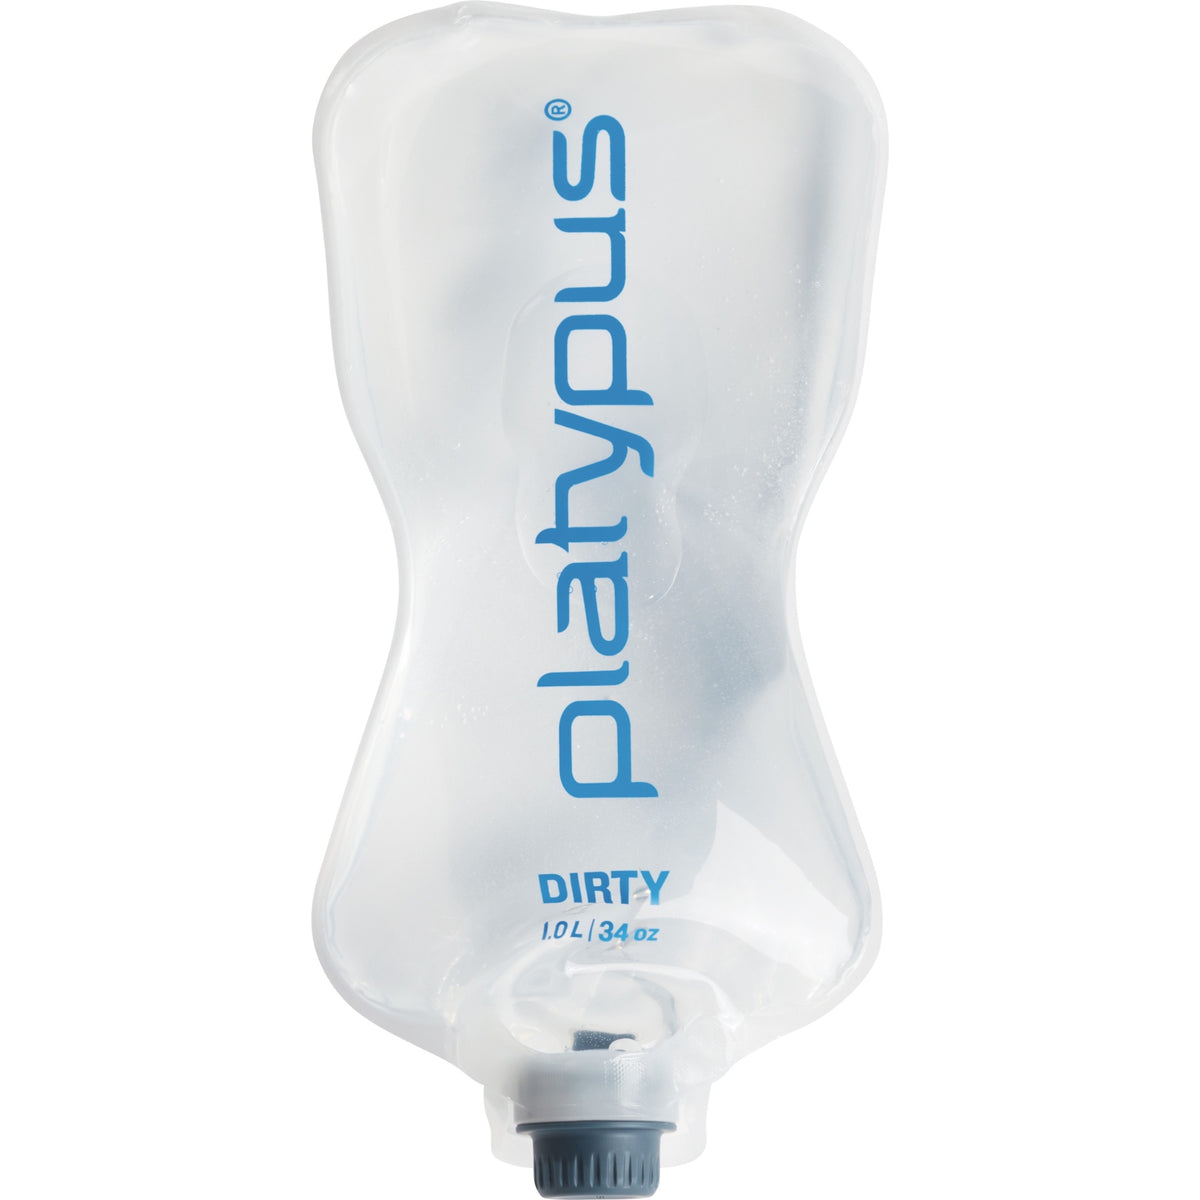 Platypus Quickdraw 1L Water Filter System